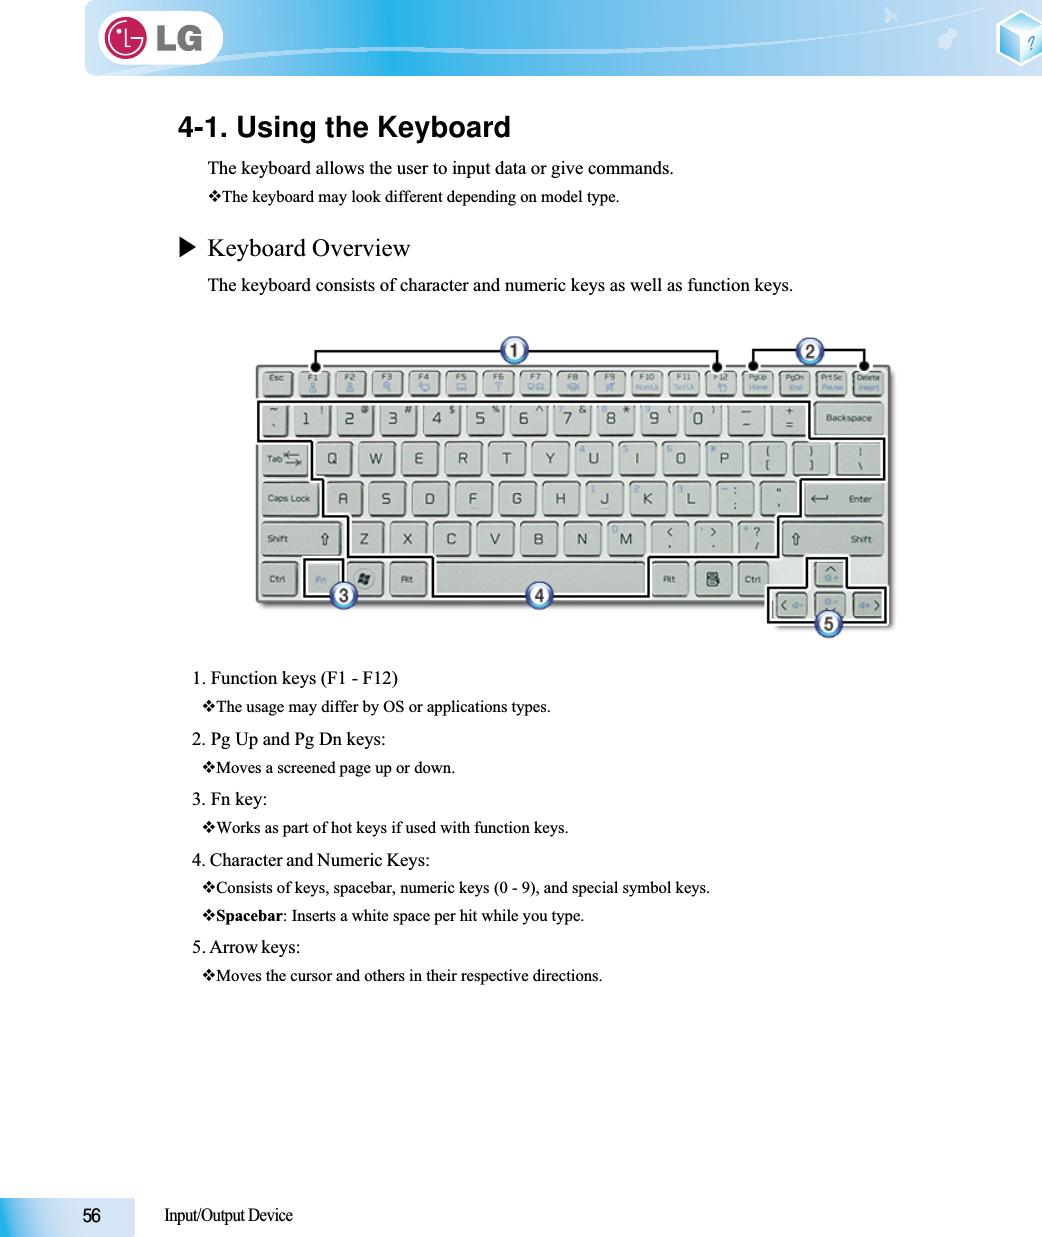 Input/Output Device4-1. Using the KeyboardThe keyboard allows the user to input data or give commands.The keyboard may look different depending on model type.XKeyboard OverviewThe keyboard consists of character and numeric keys as well as function keys.1. Function keys (F1 - F12)The usage may differ by OS or applications types.2. Pg Up and Pg Dn keys:Moves a screened page up or down.3. Fn key:Works as part of hot keys if used with function keys.4. Character and Numeric Keys: Consists of keys, spacebar, numeric keys (0 - 9), and special symbol keys.Spacebar: Inserts a white space per hit while you type.5. Arrow keys: Moves the cursor and others in their respective directions.